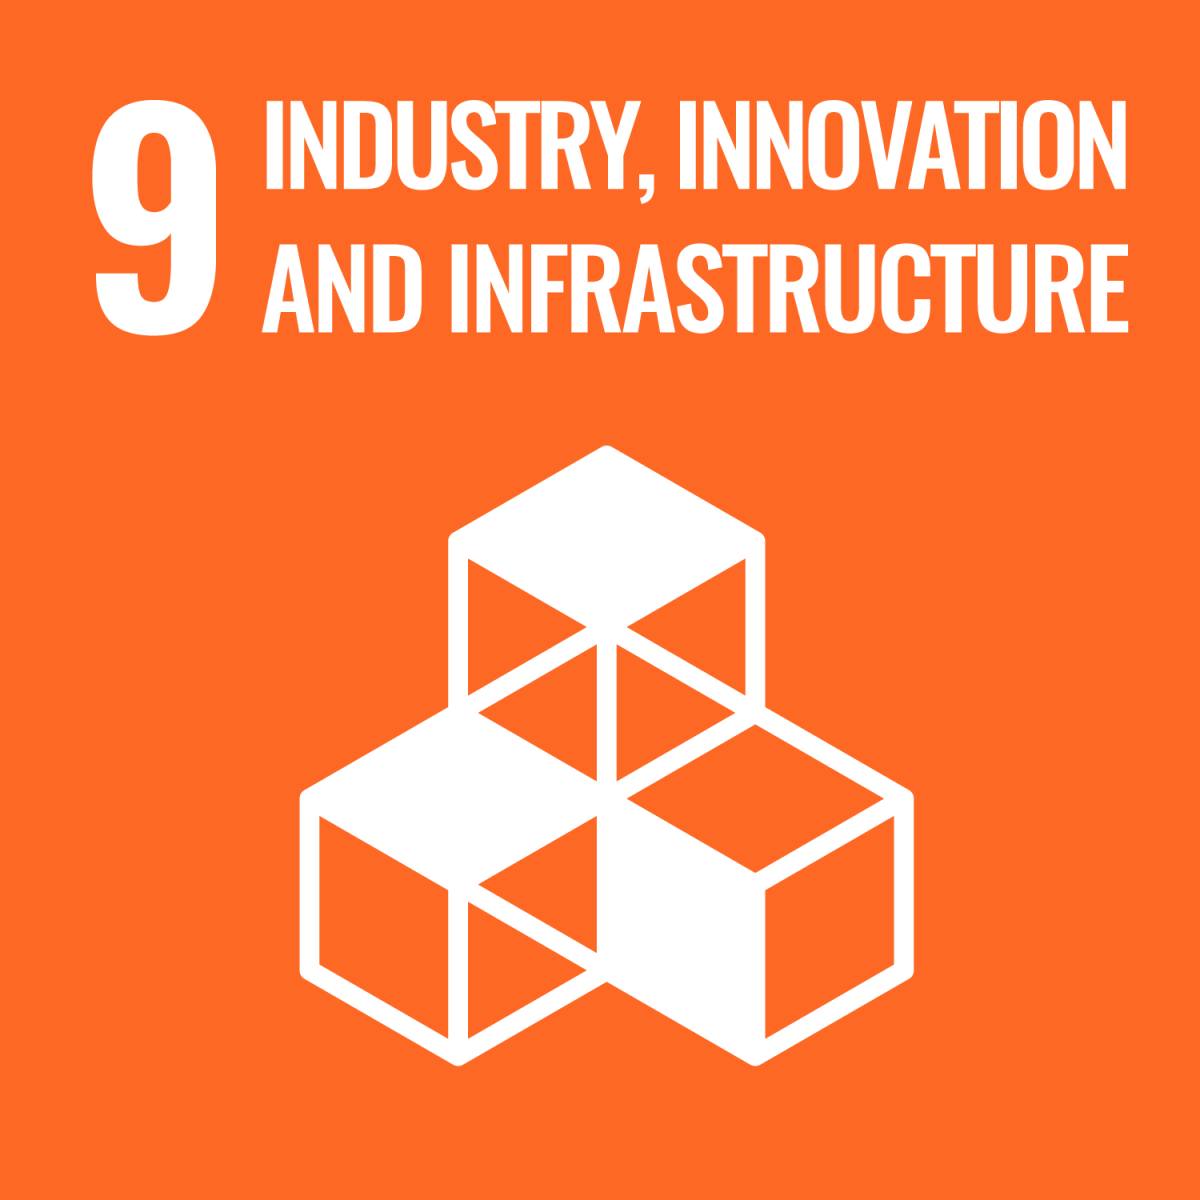 Shows UN SDG 9 Industry, Innovation and Infrastructure